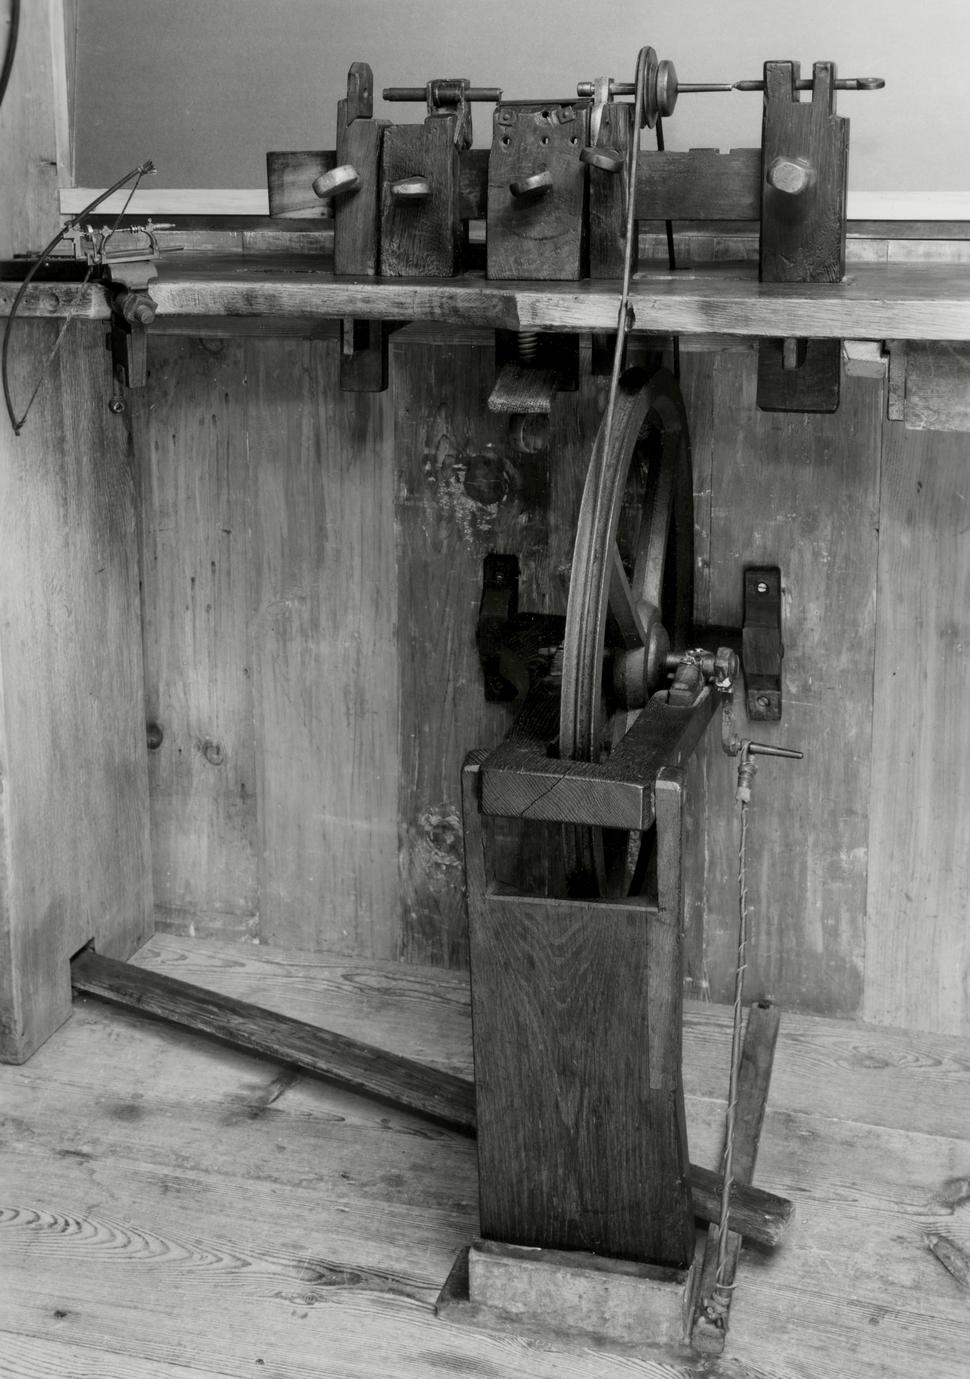 Black and white photograph of a hand lathe (turning bench).